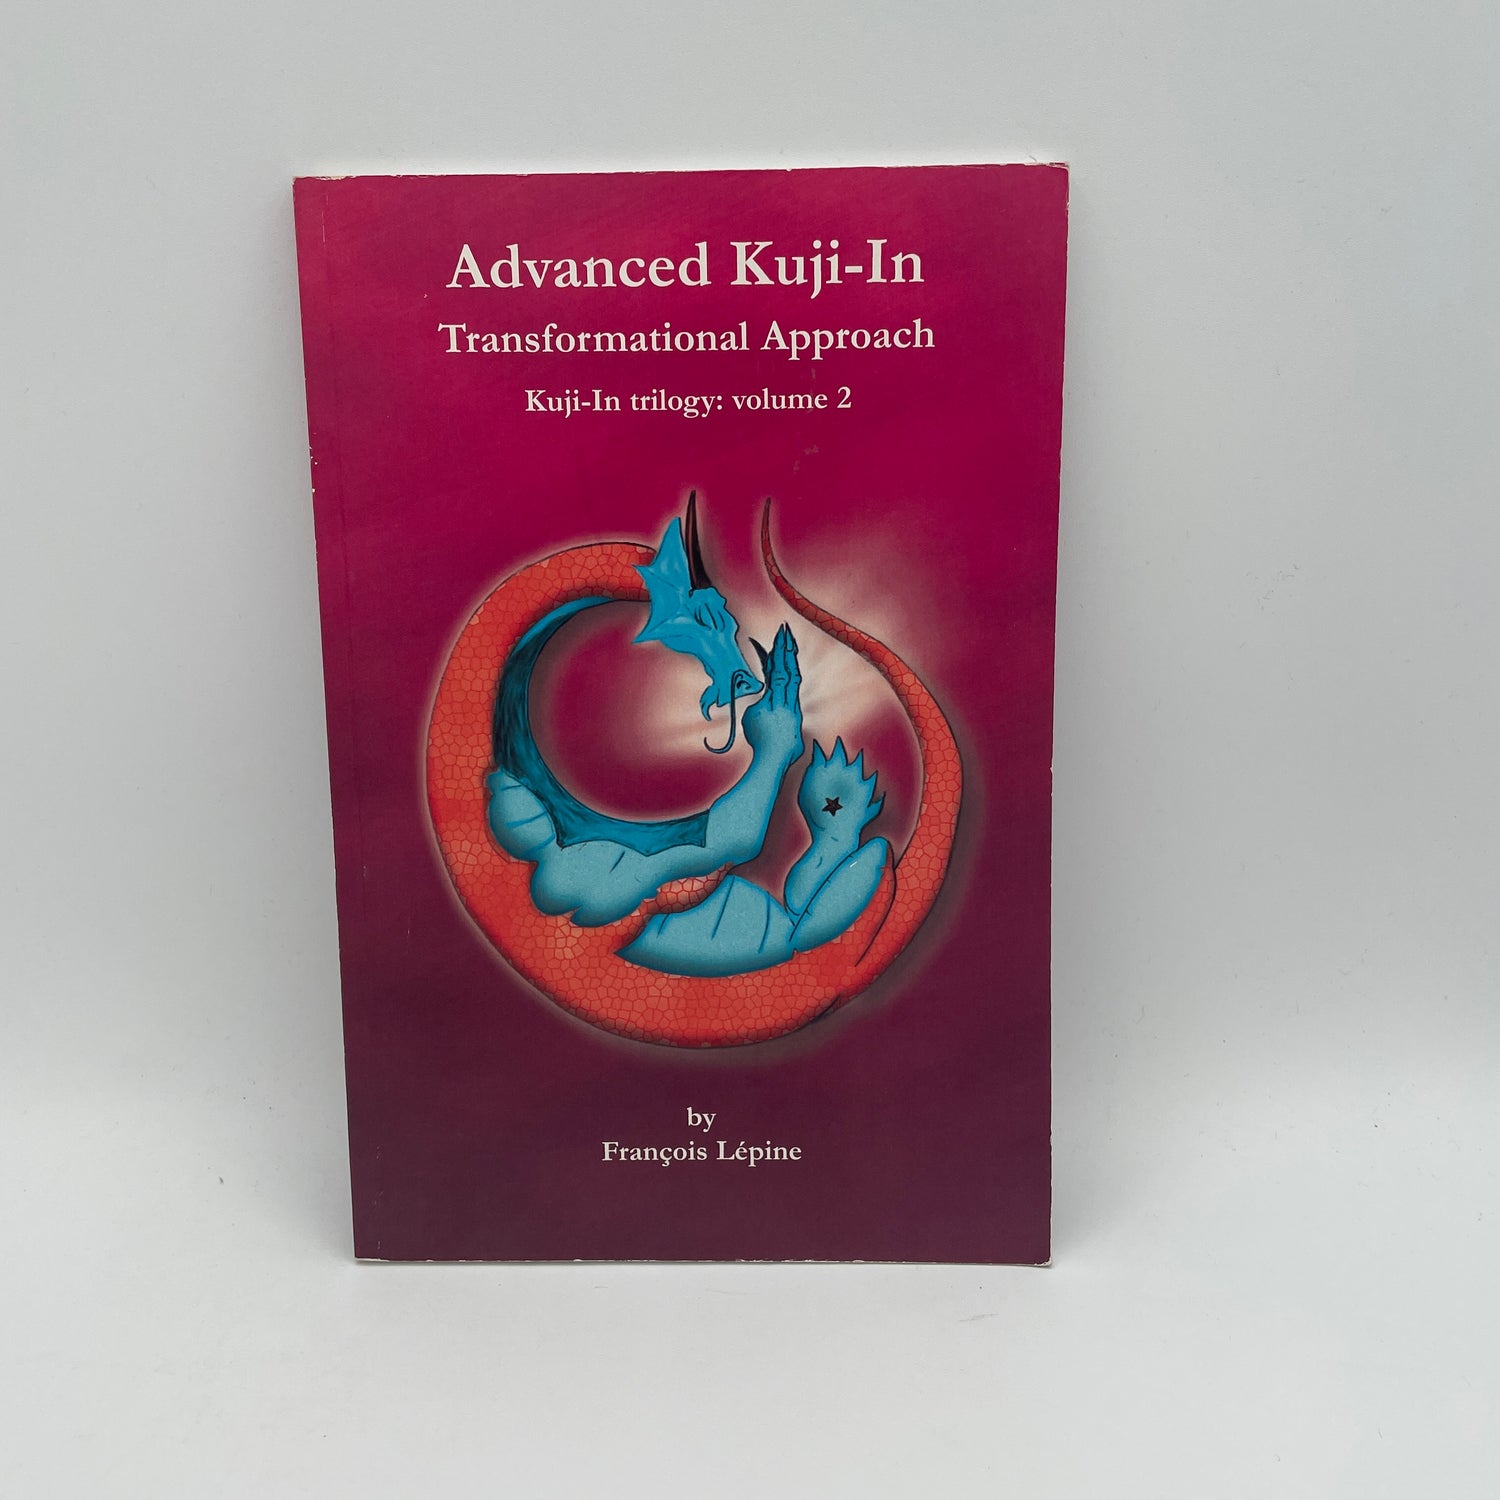 Kuji-in Trilogy Book 2 Advanced Kuji-In Transformational Approach by Francois Lepine (Preowned)